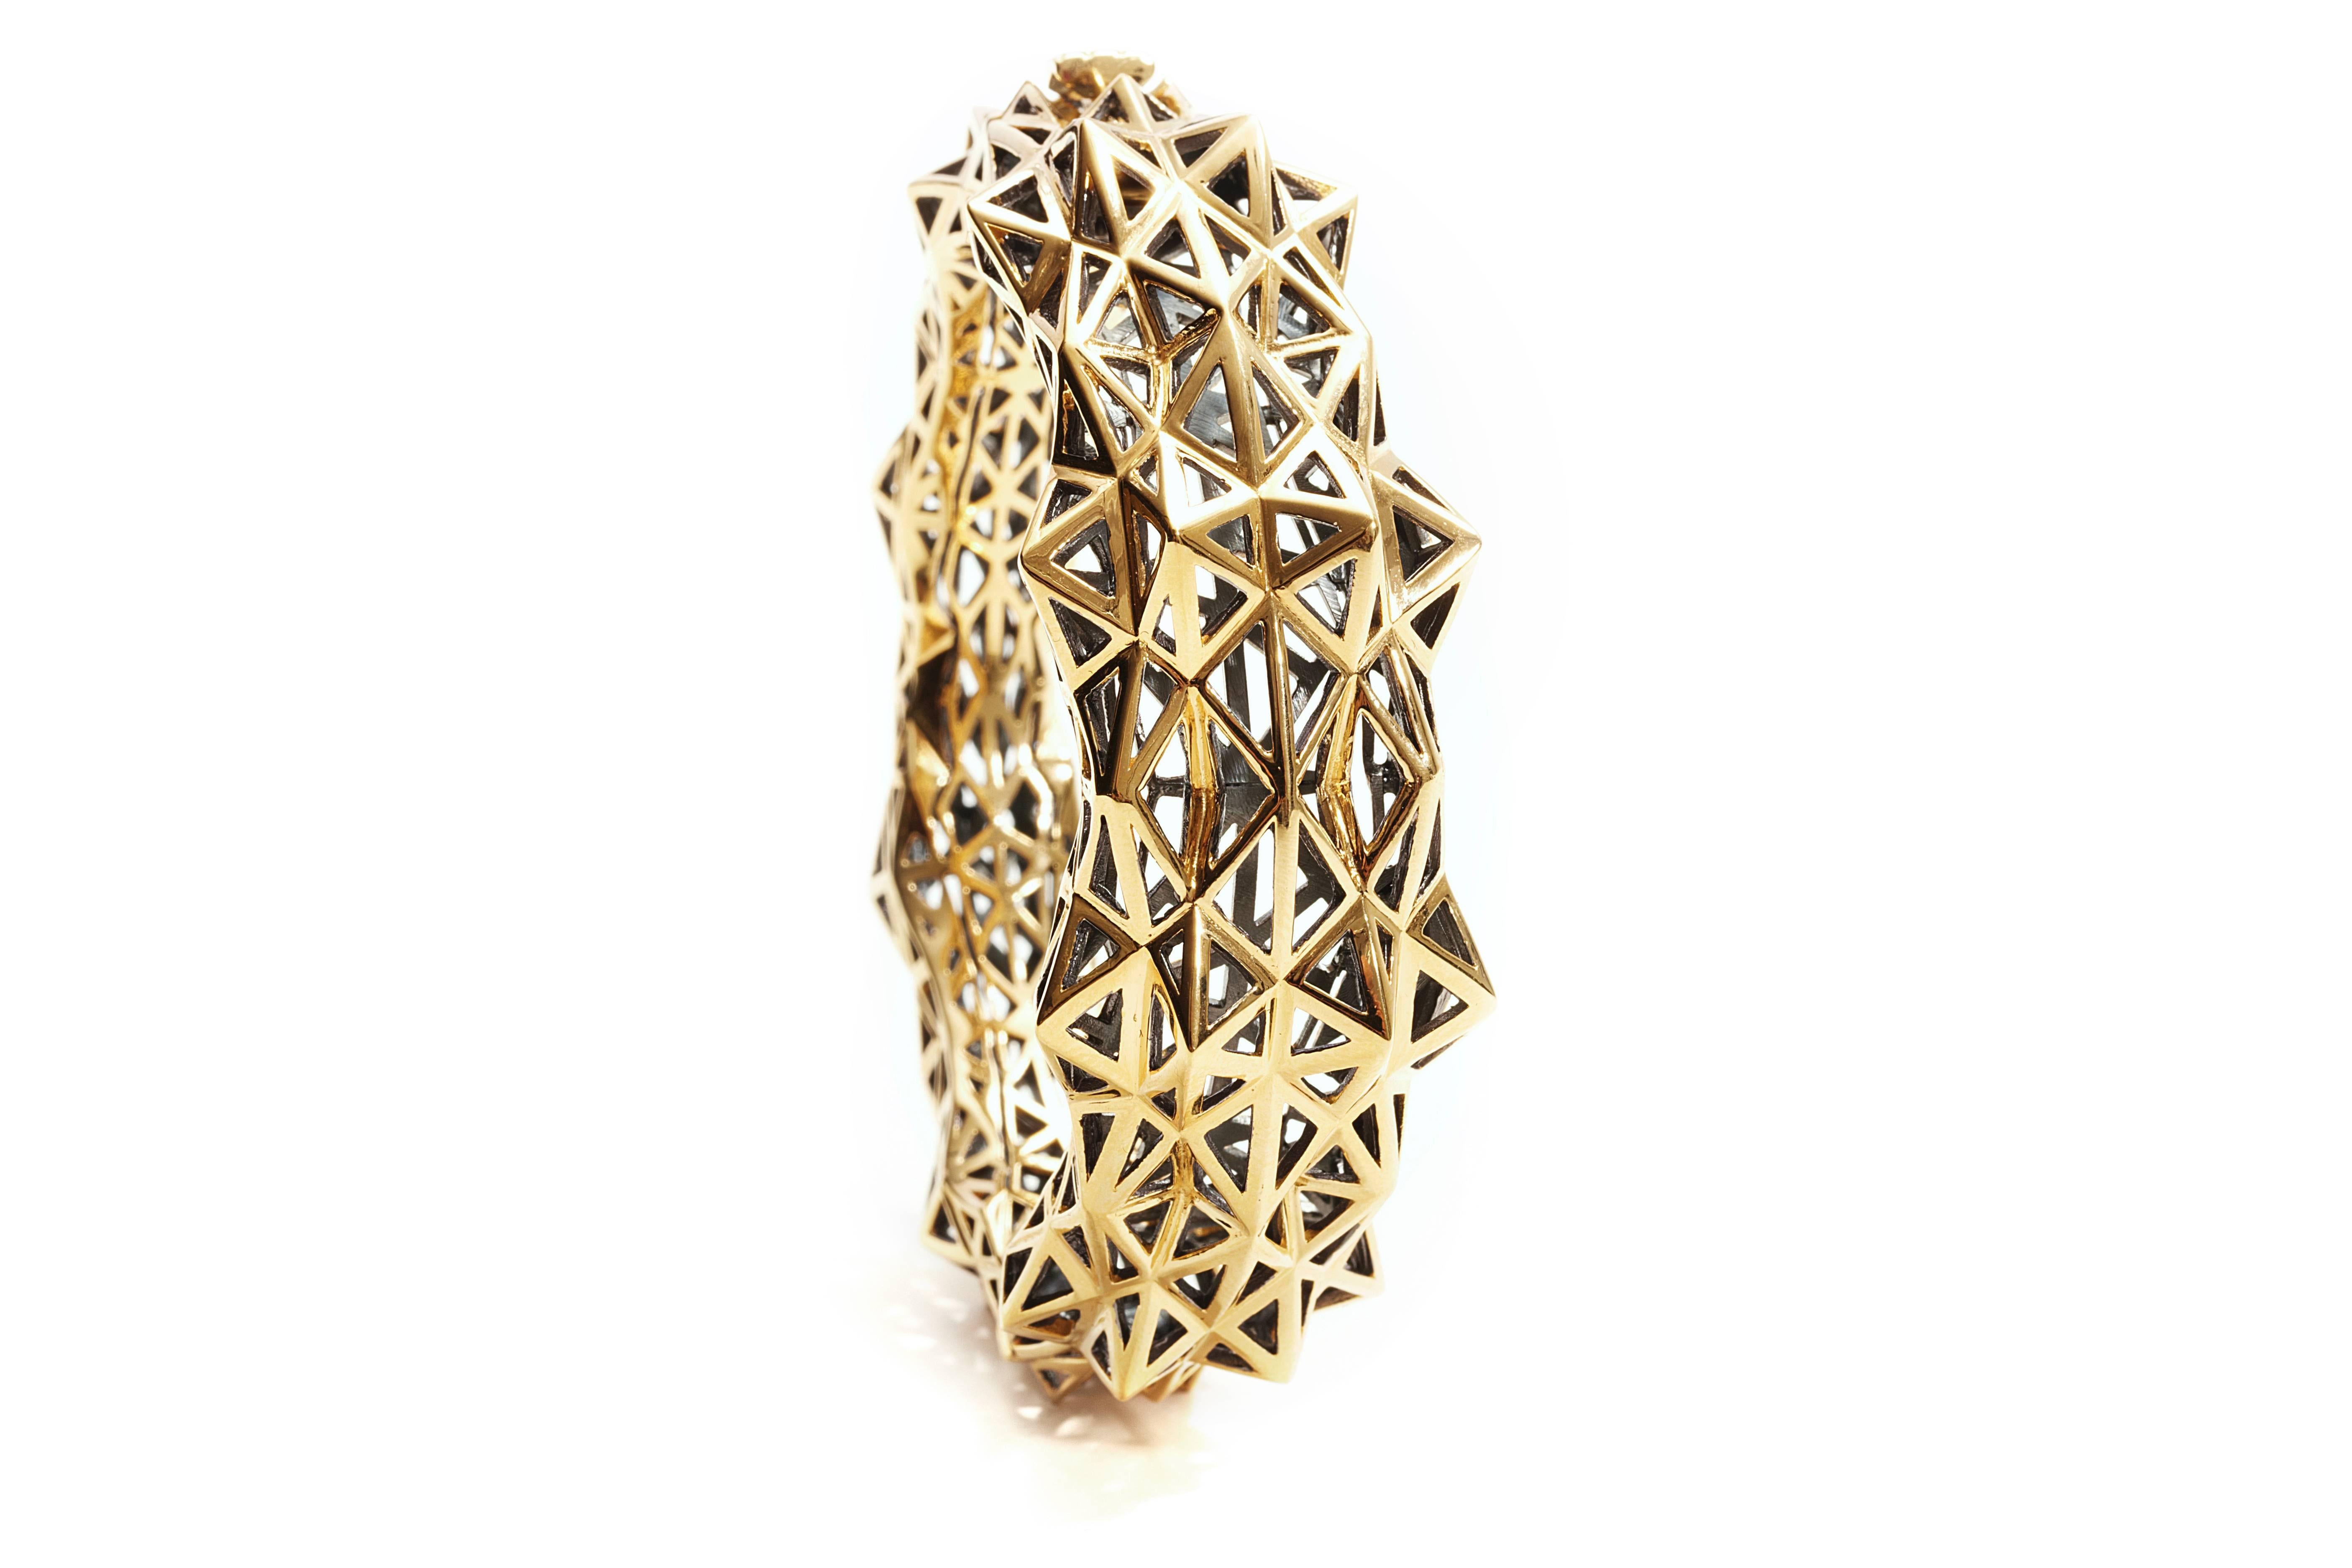 This limited edition, 18K Stellated Gold Bracelet evokes personal power and strength. The geometric patterns of this bracelet fit within designer John Brevard’s larger sacred geometric collections. This unique, hinge bracelet is part of John